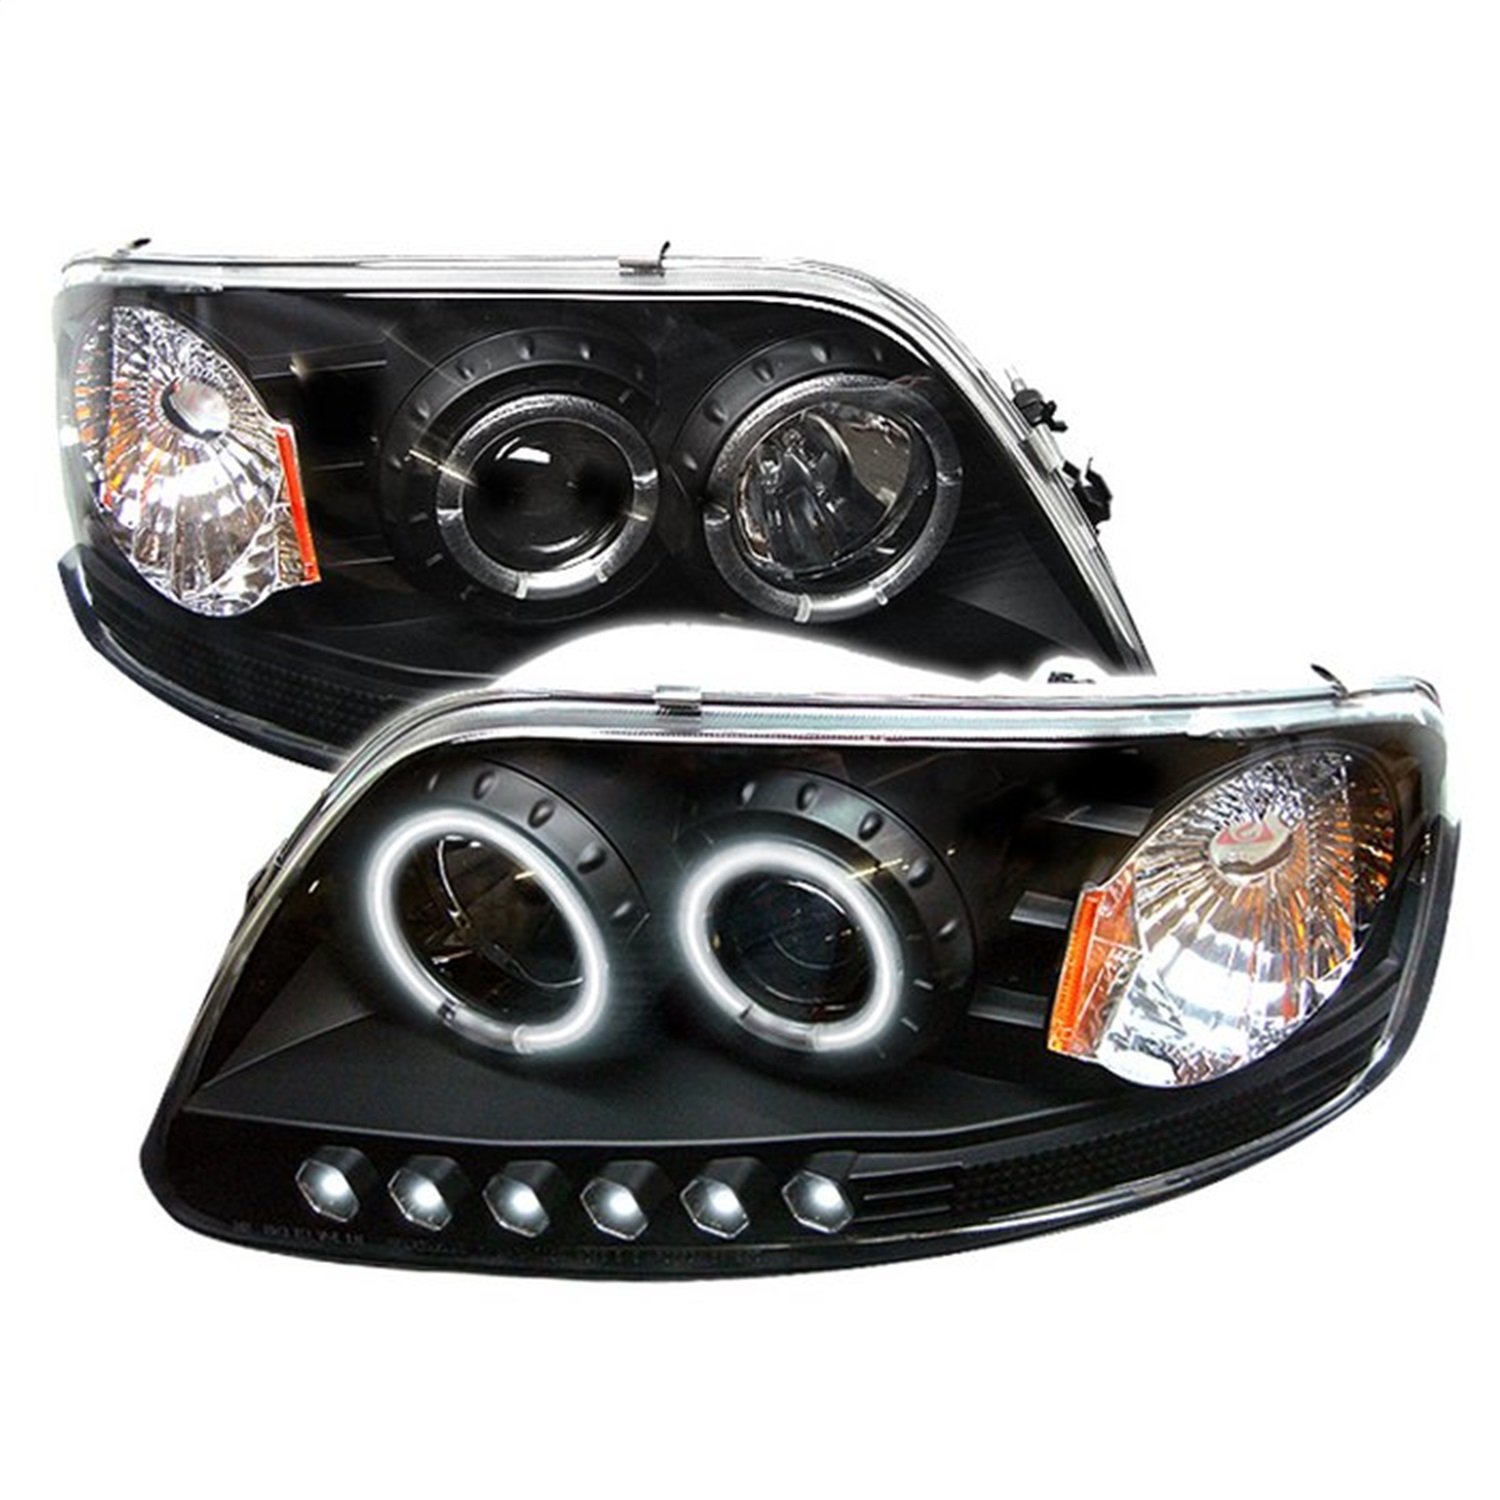 Spyder Auto 5010292 CCFL LED Projector Headlights Fits 97-03 Expedition F-150